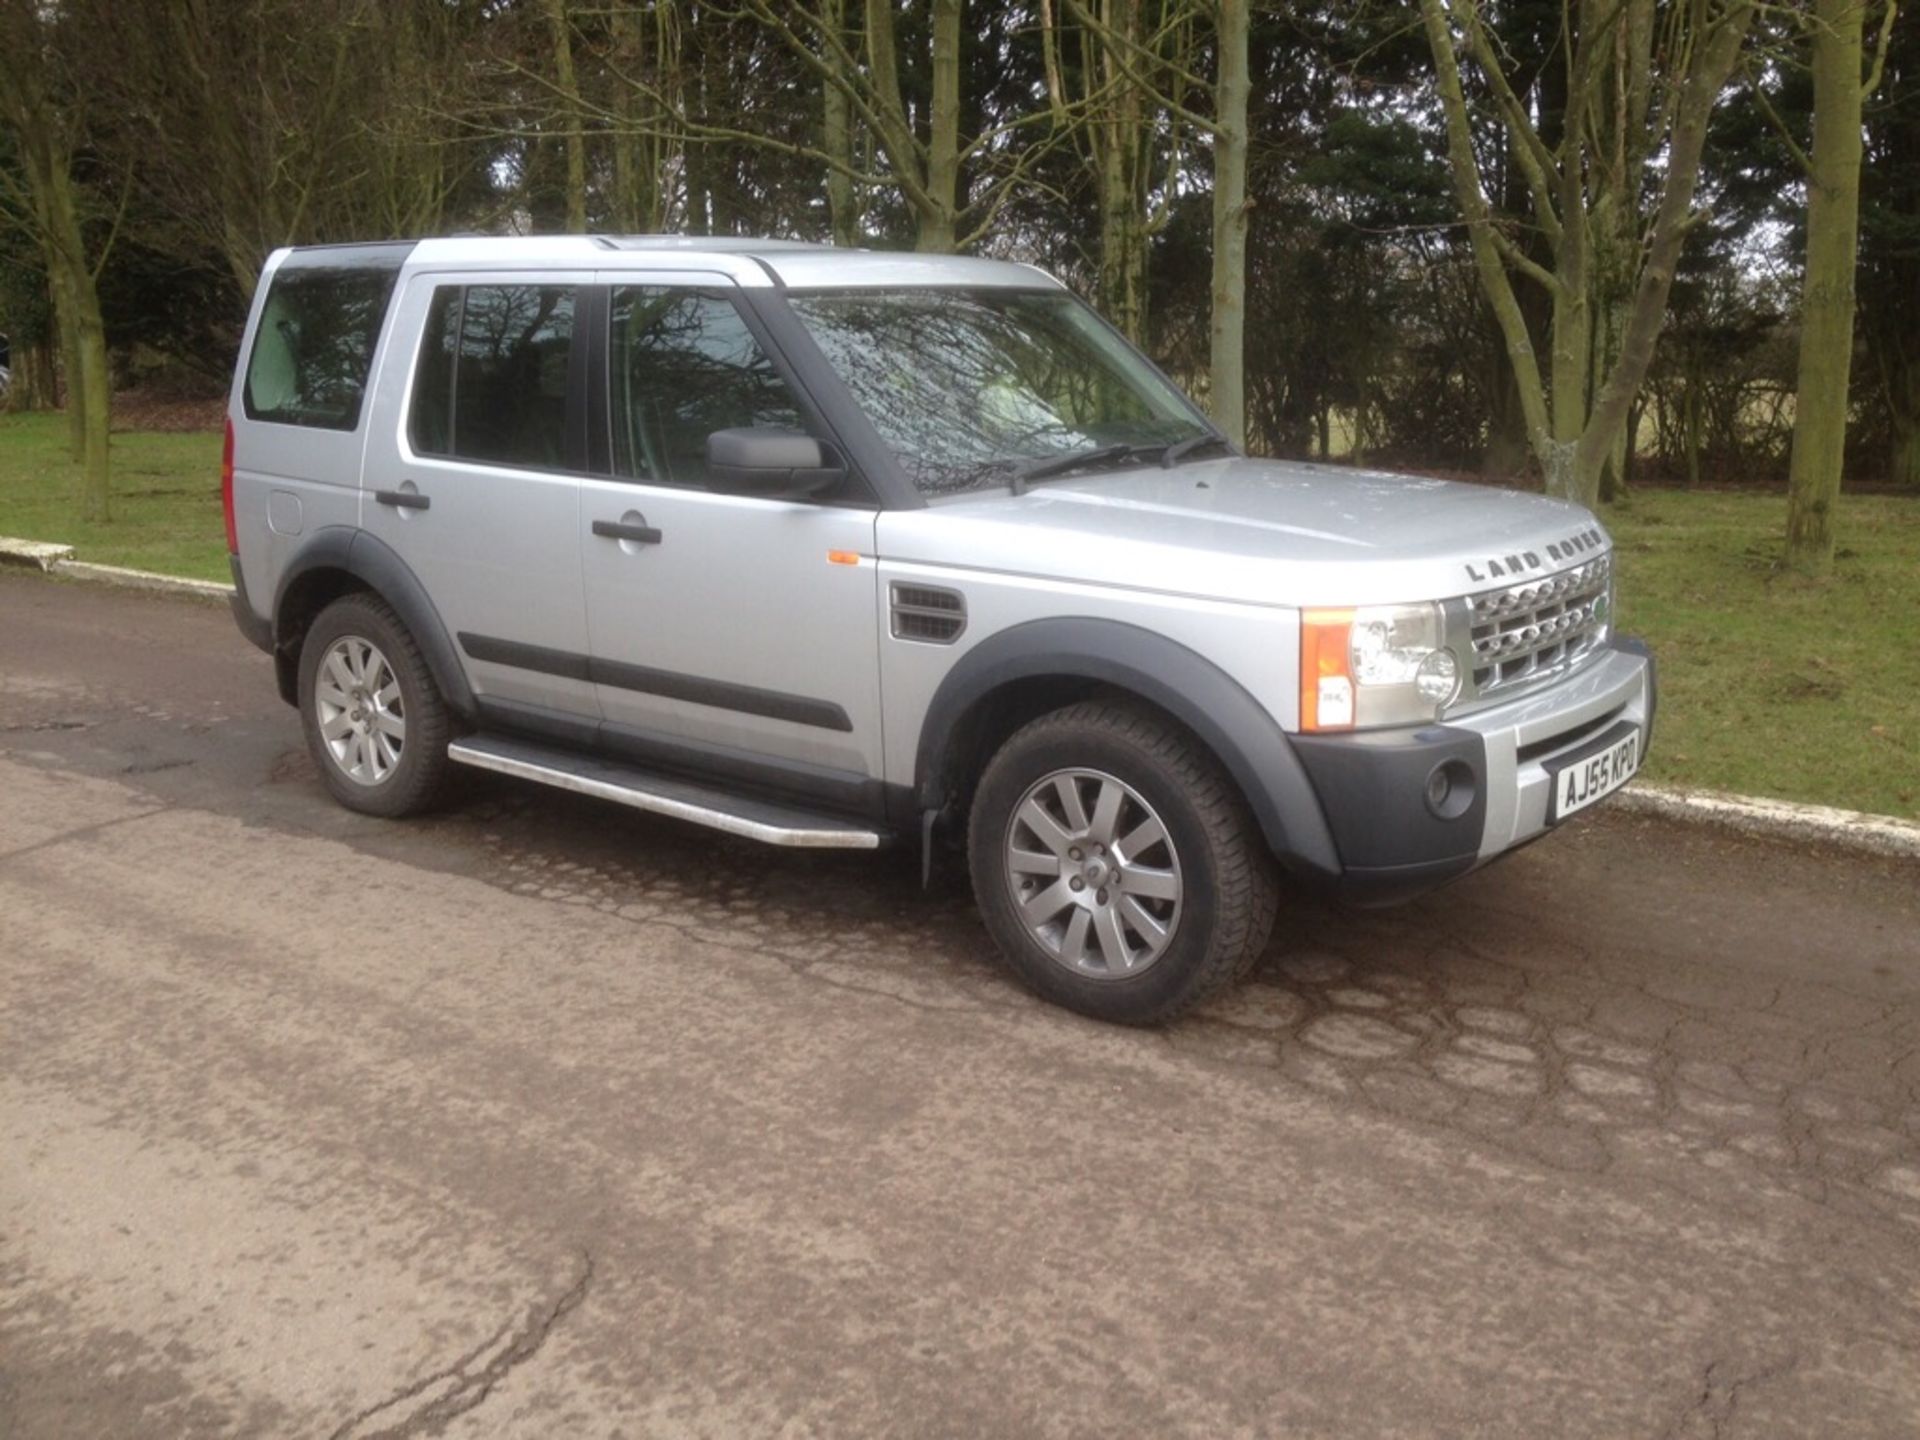 LAND ROVER DISCOVERY 4x4 2005 55 REG - Image 3 of 8